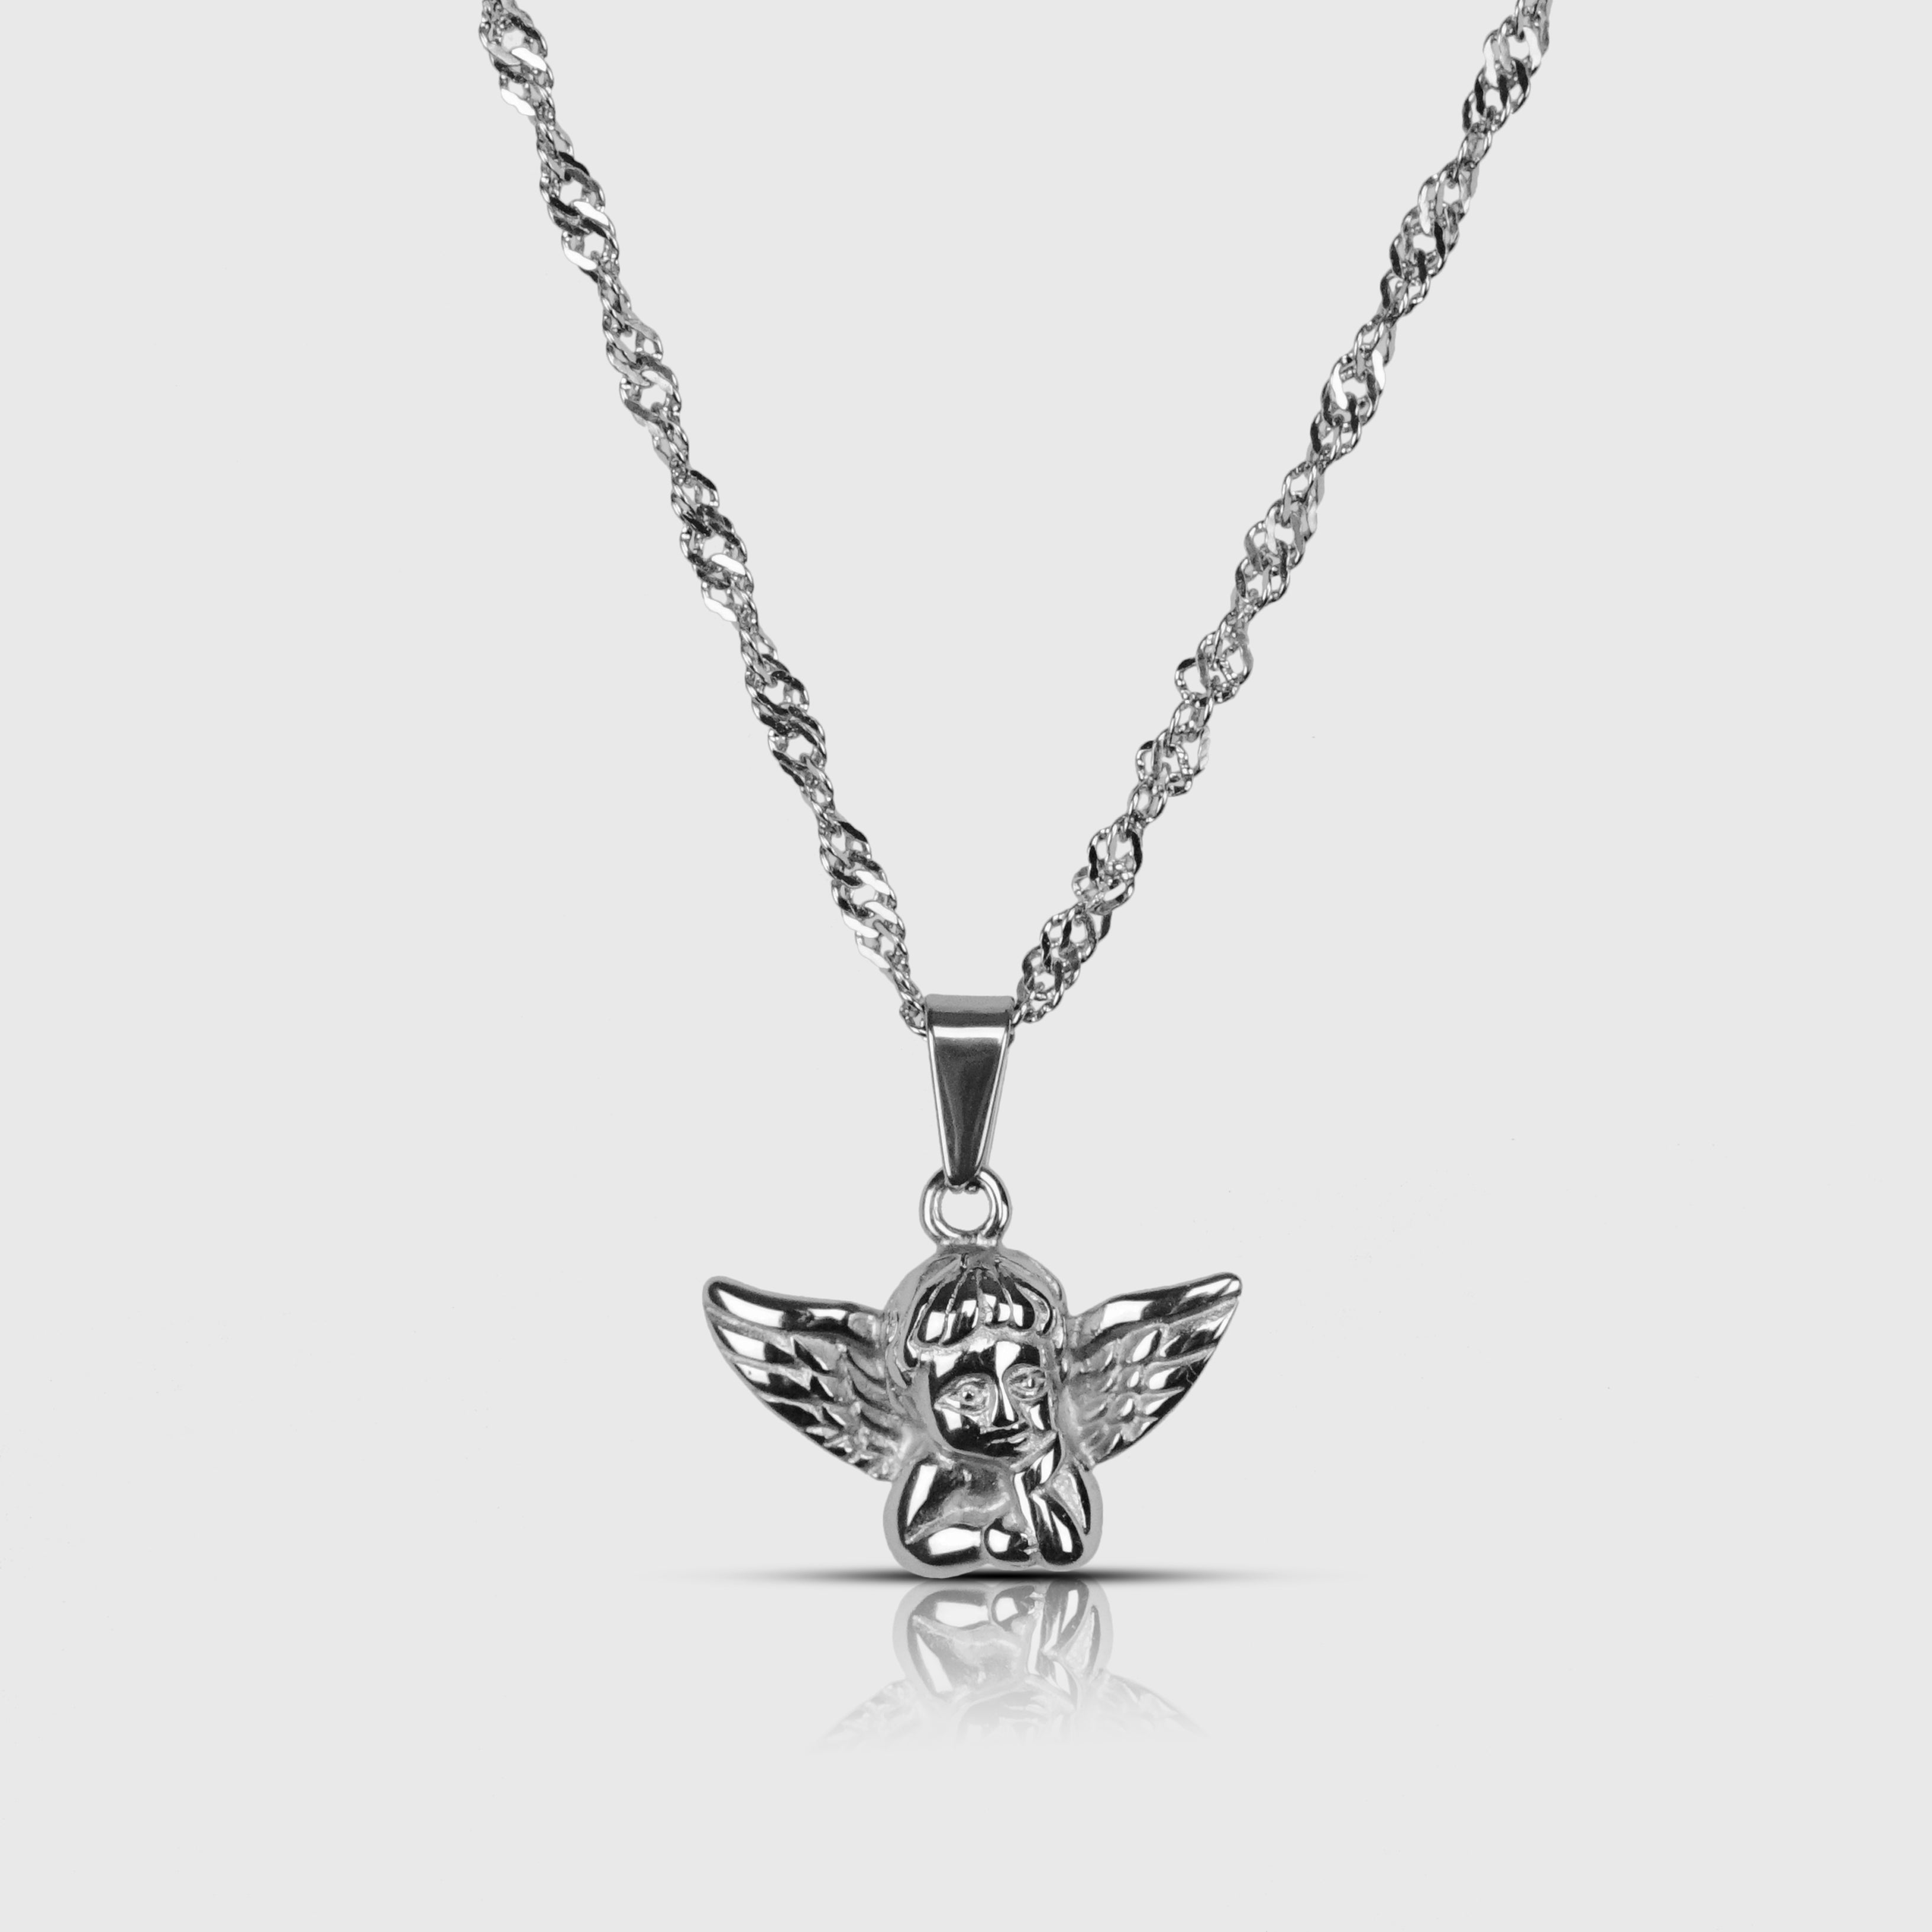 ANGEL NECKLACE - SILVER TONE